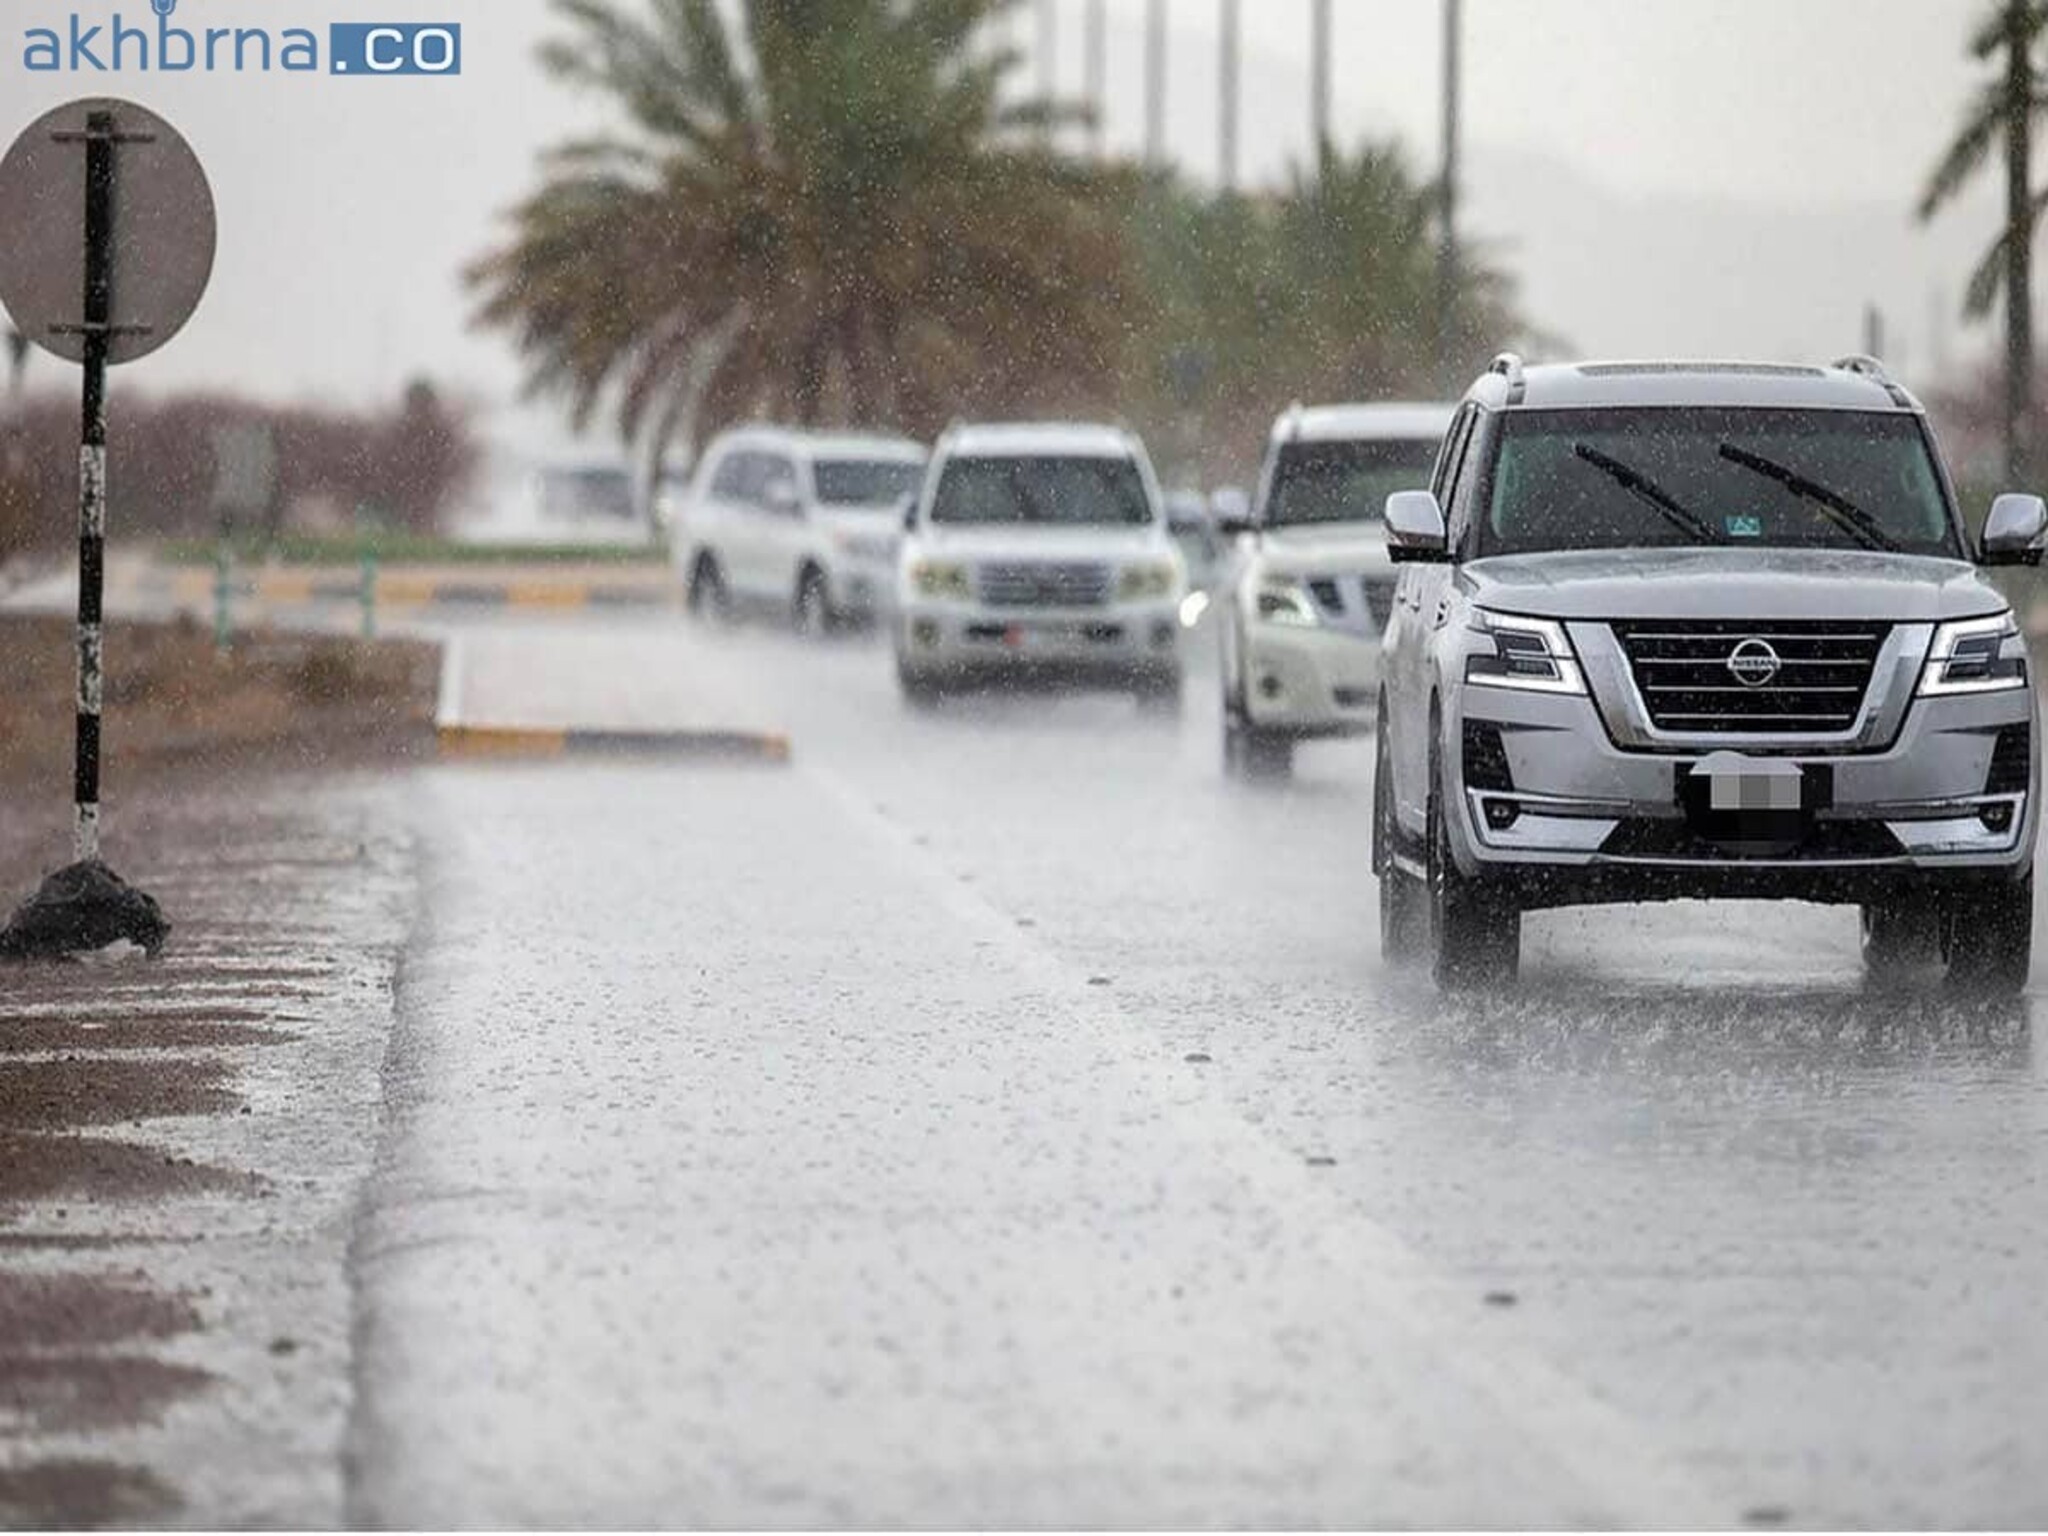 UAE Authority issues guidelines for farmers during unpredictable weather 